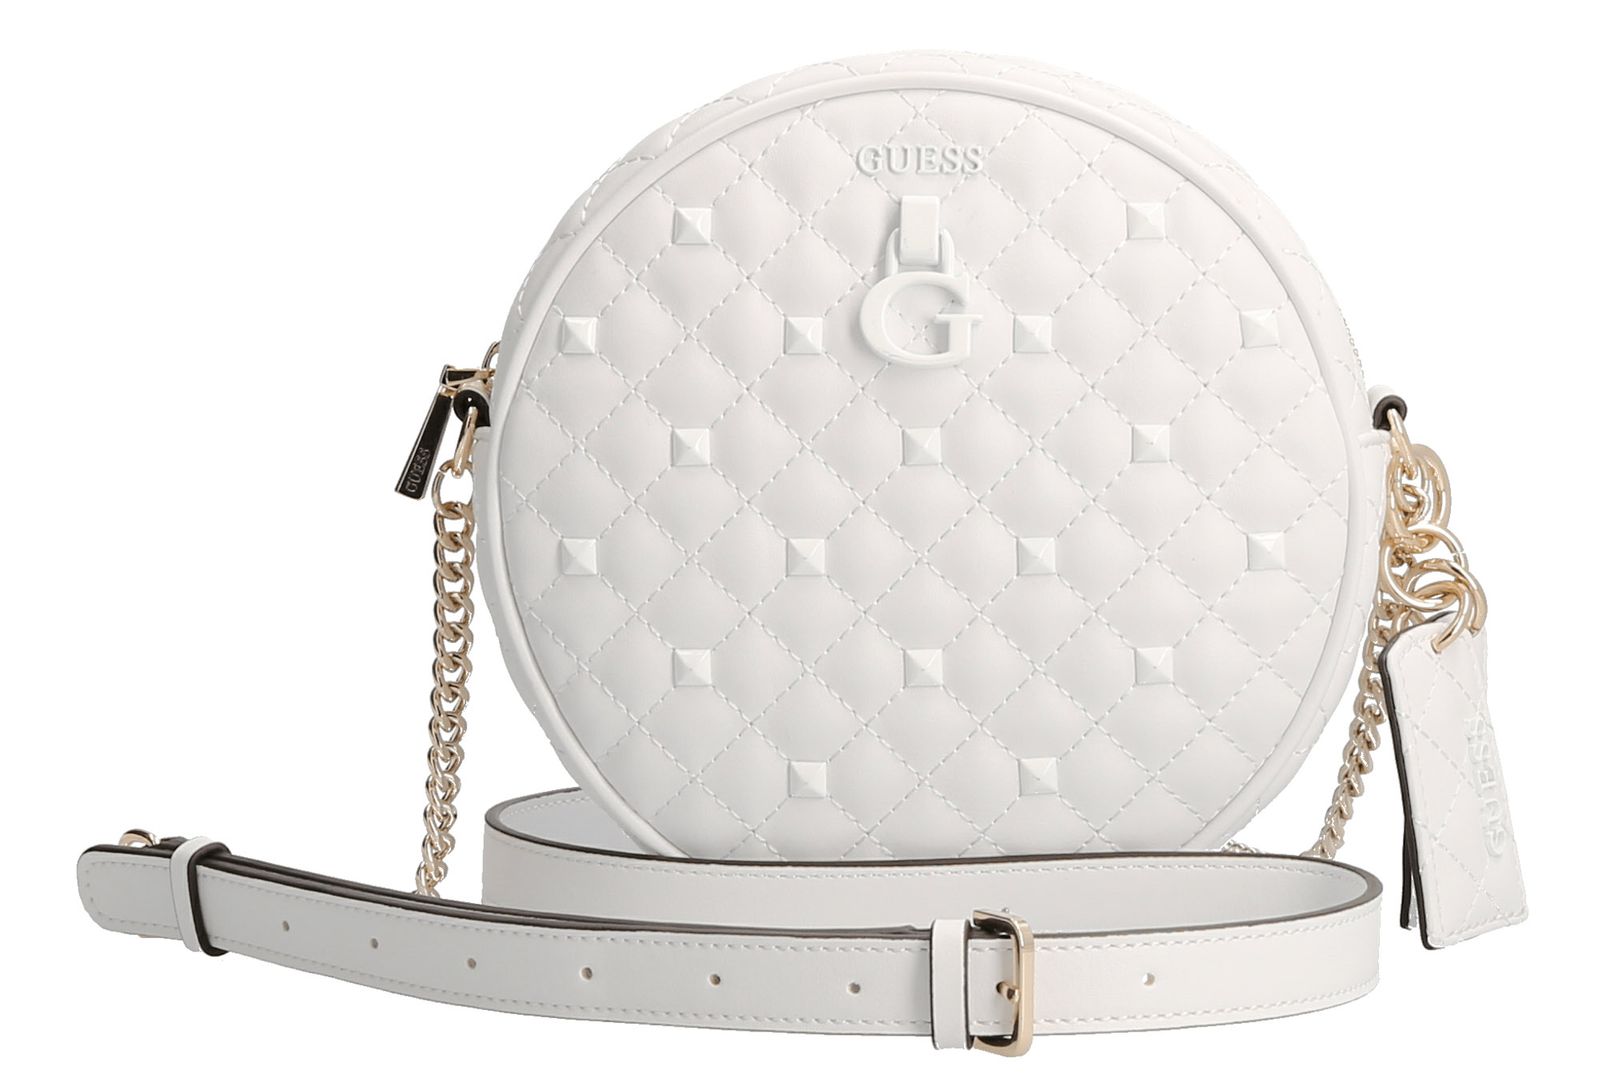 White Guess Round Crossbody Bag | Available on www.guess.com for ₹6,800